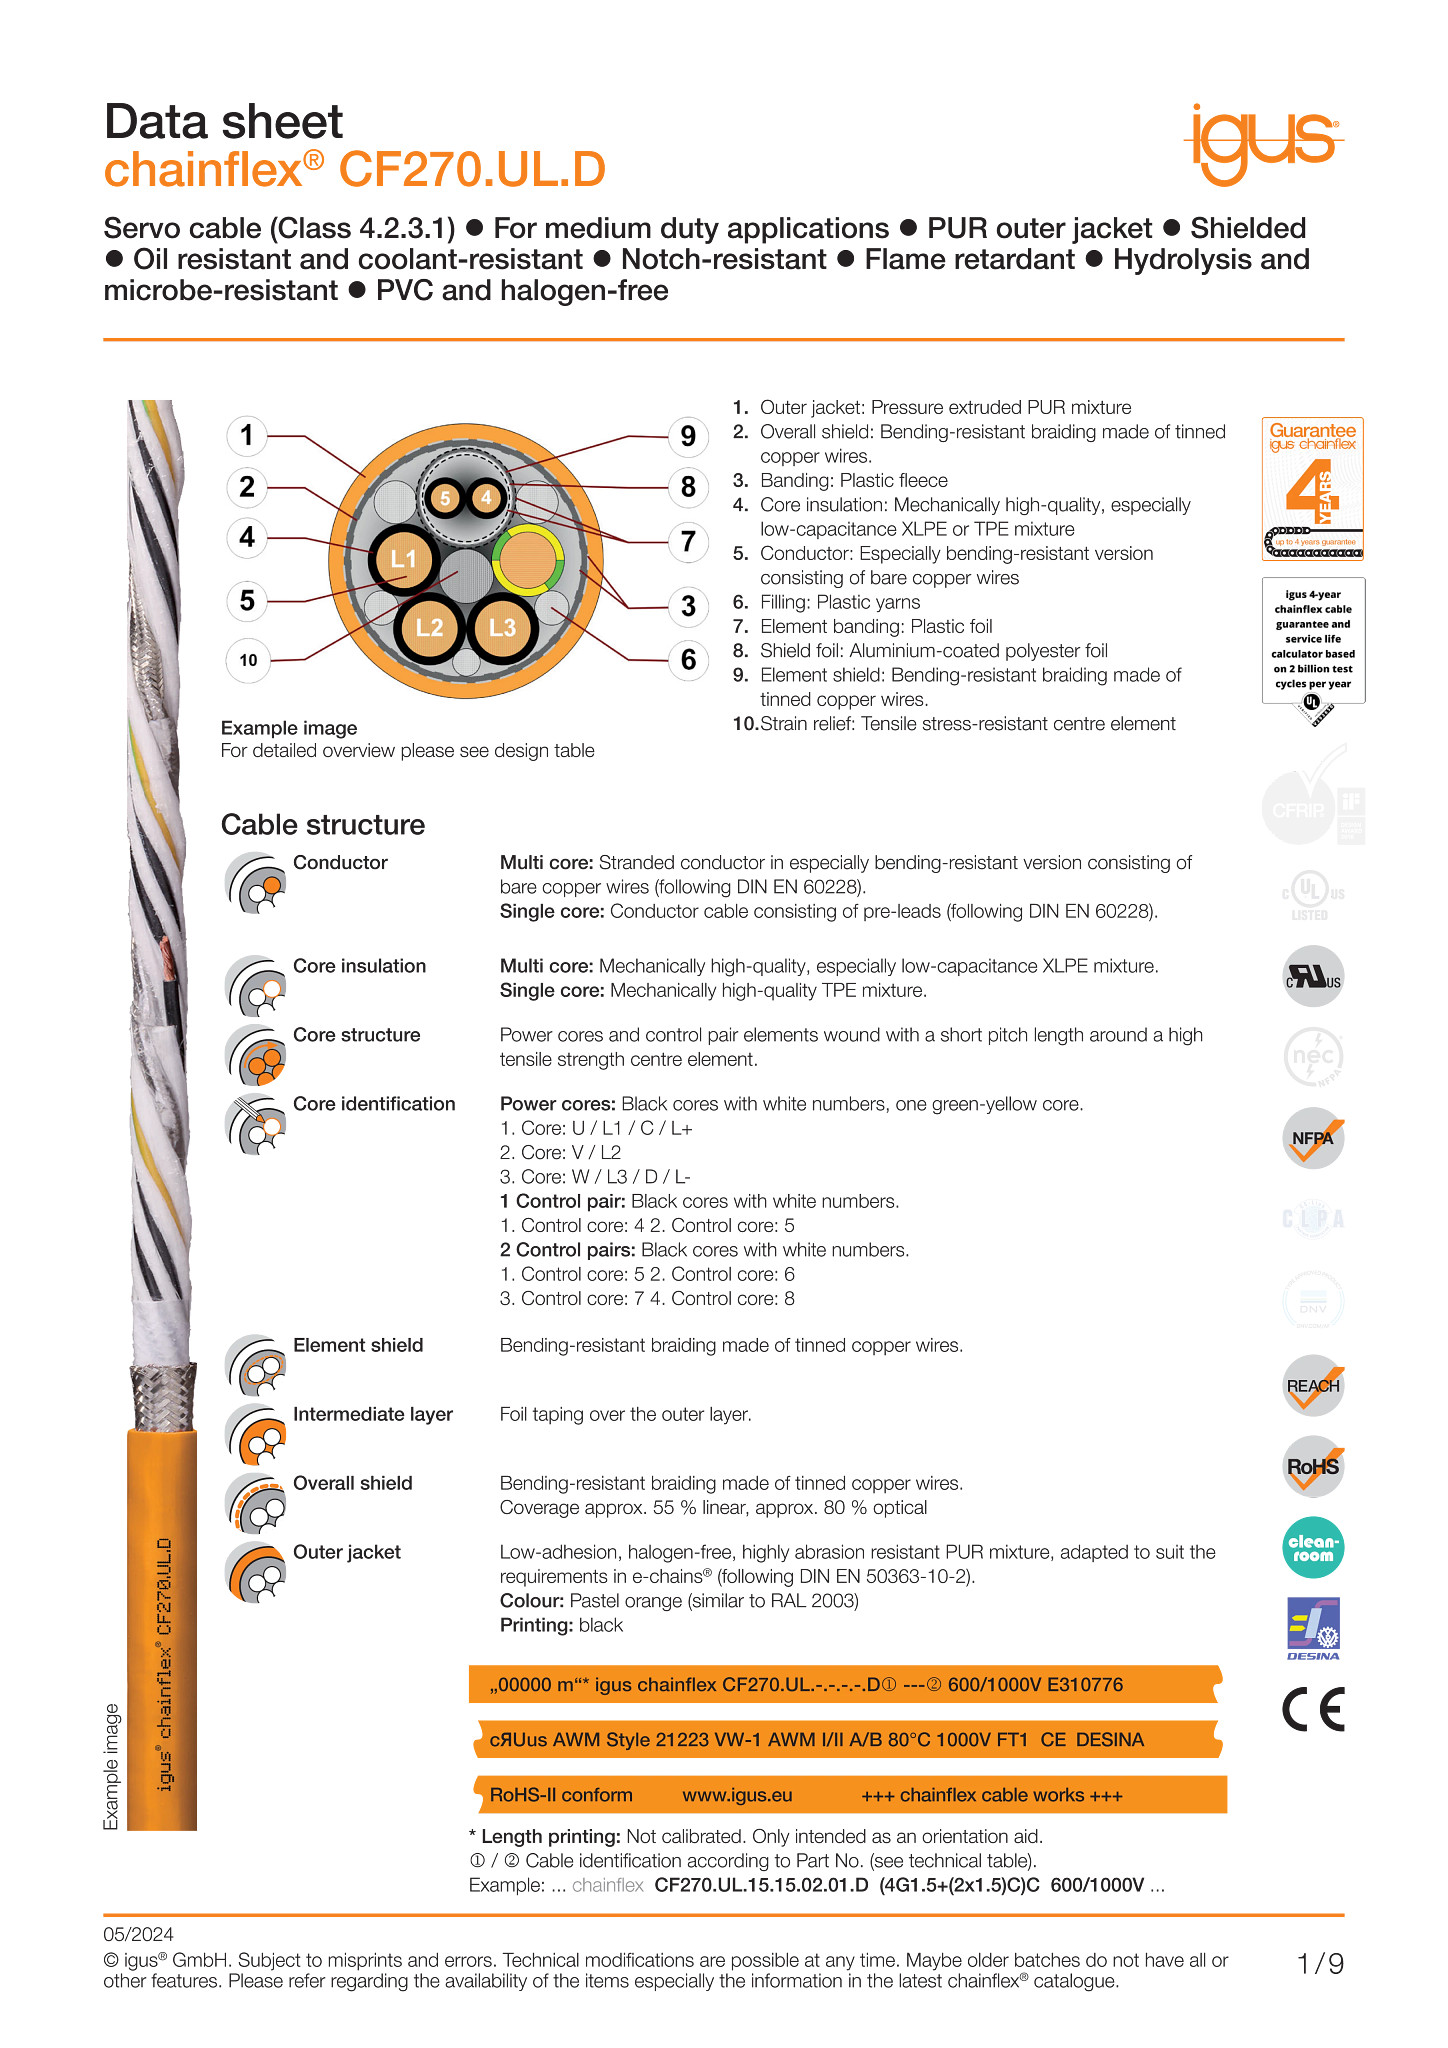 chainflex® motor cable CF310.UL | igus®